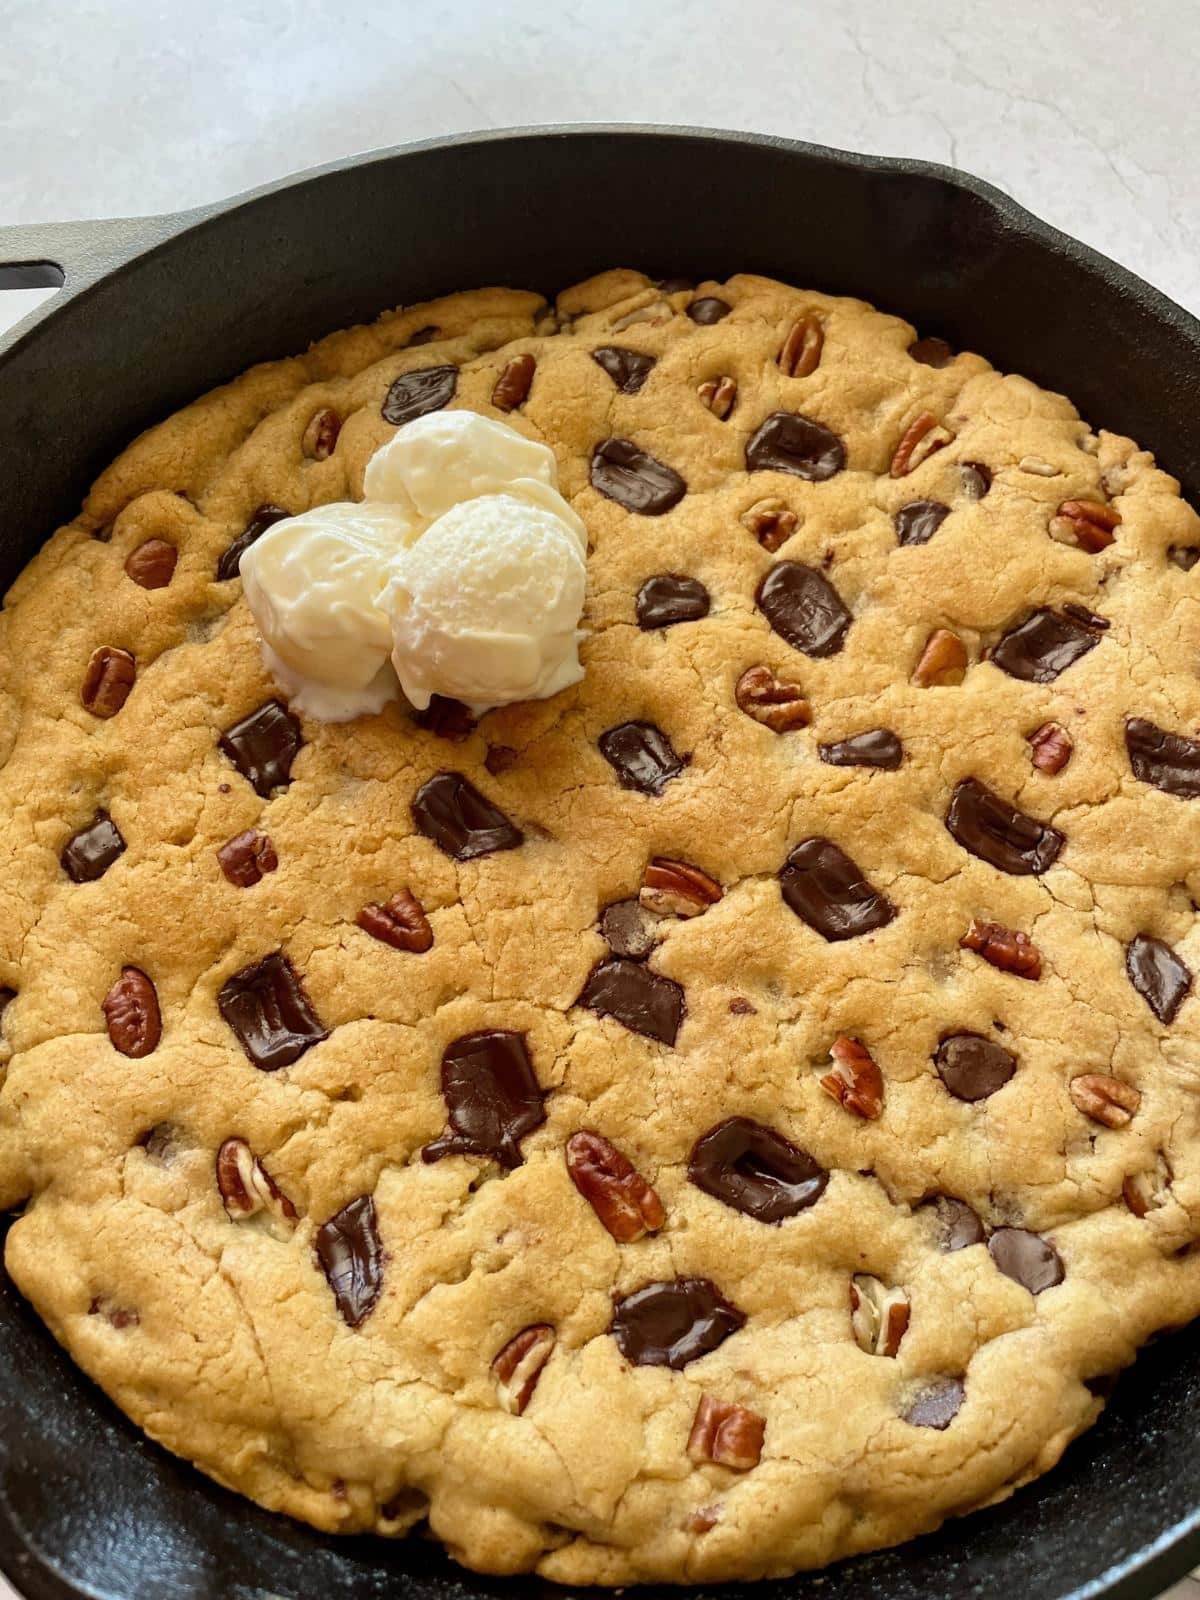 Angled view of the skillet cookie.